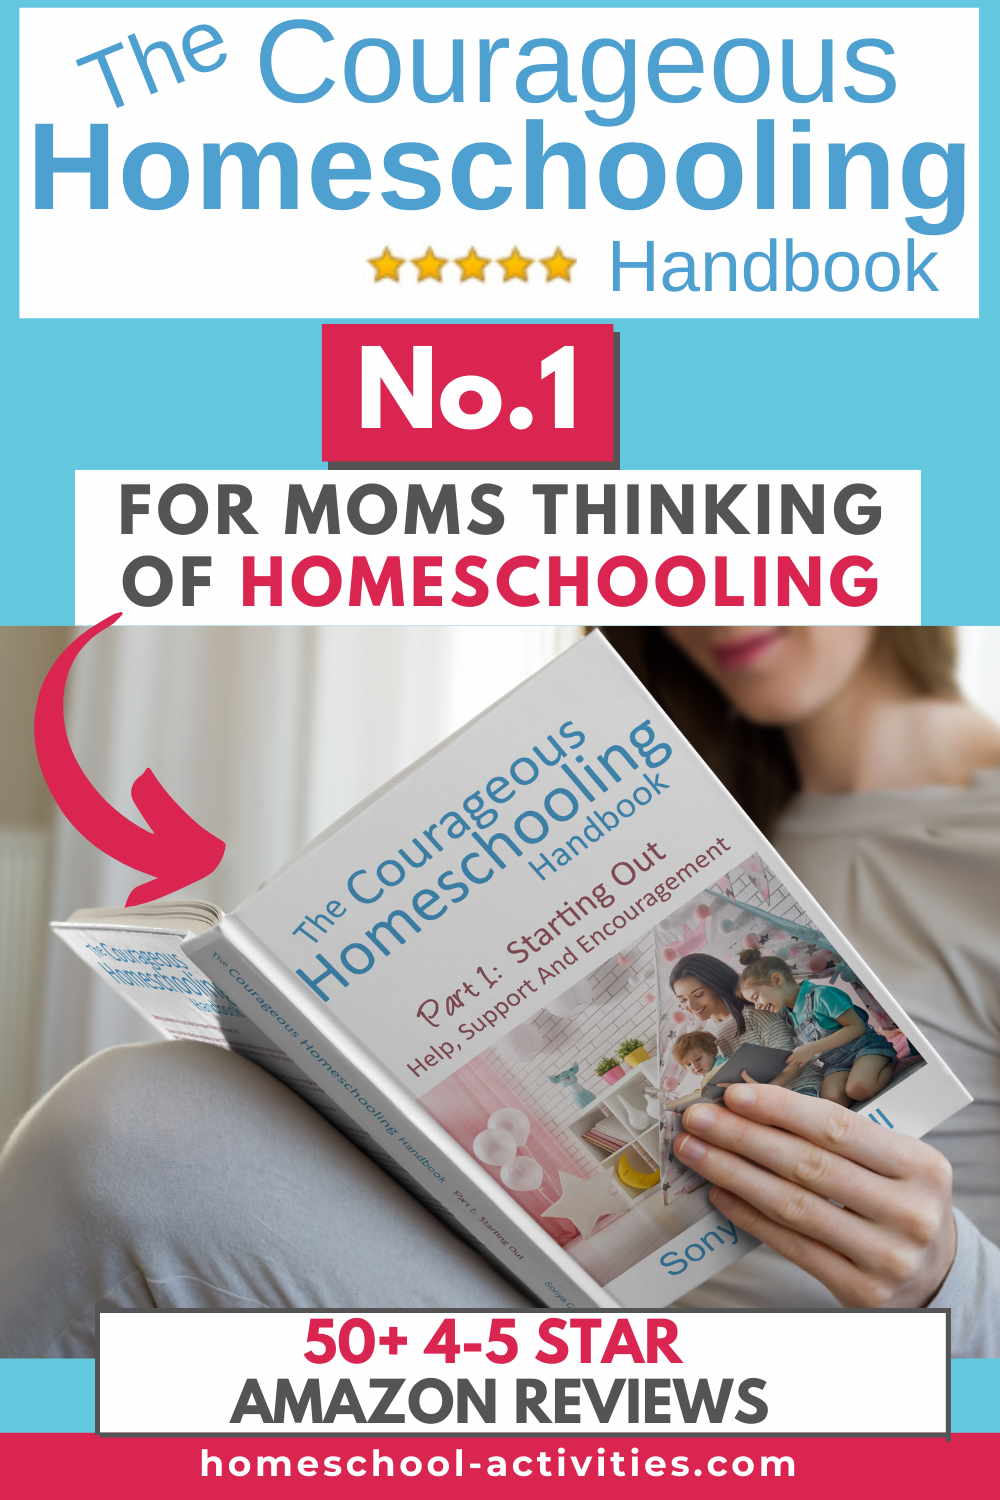 The Courageous Homeschooling Handbook answers all the main fears we share and shows you why homeschooling is the best decision you've ever made.